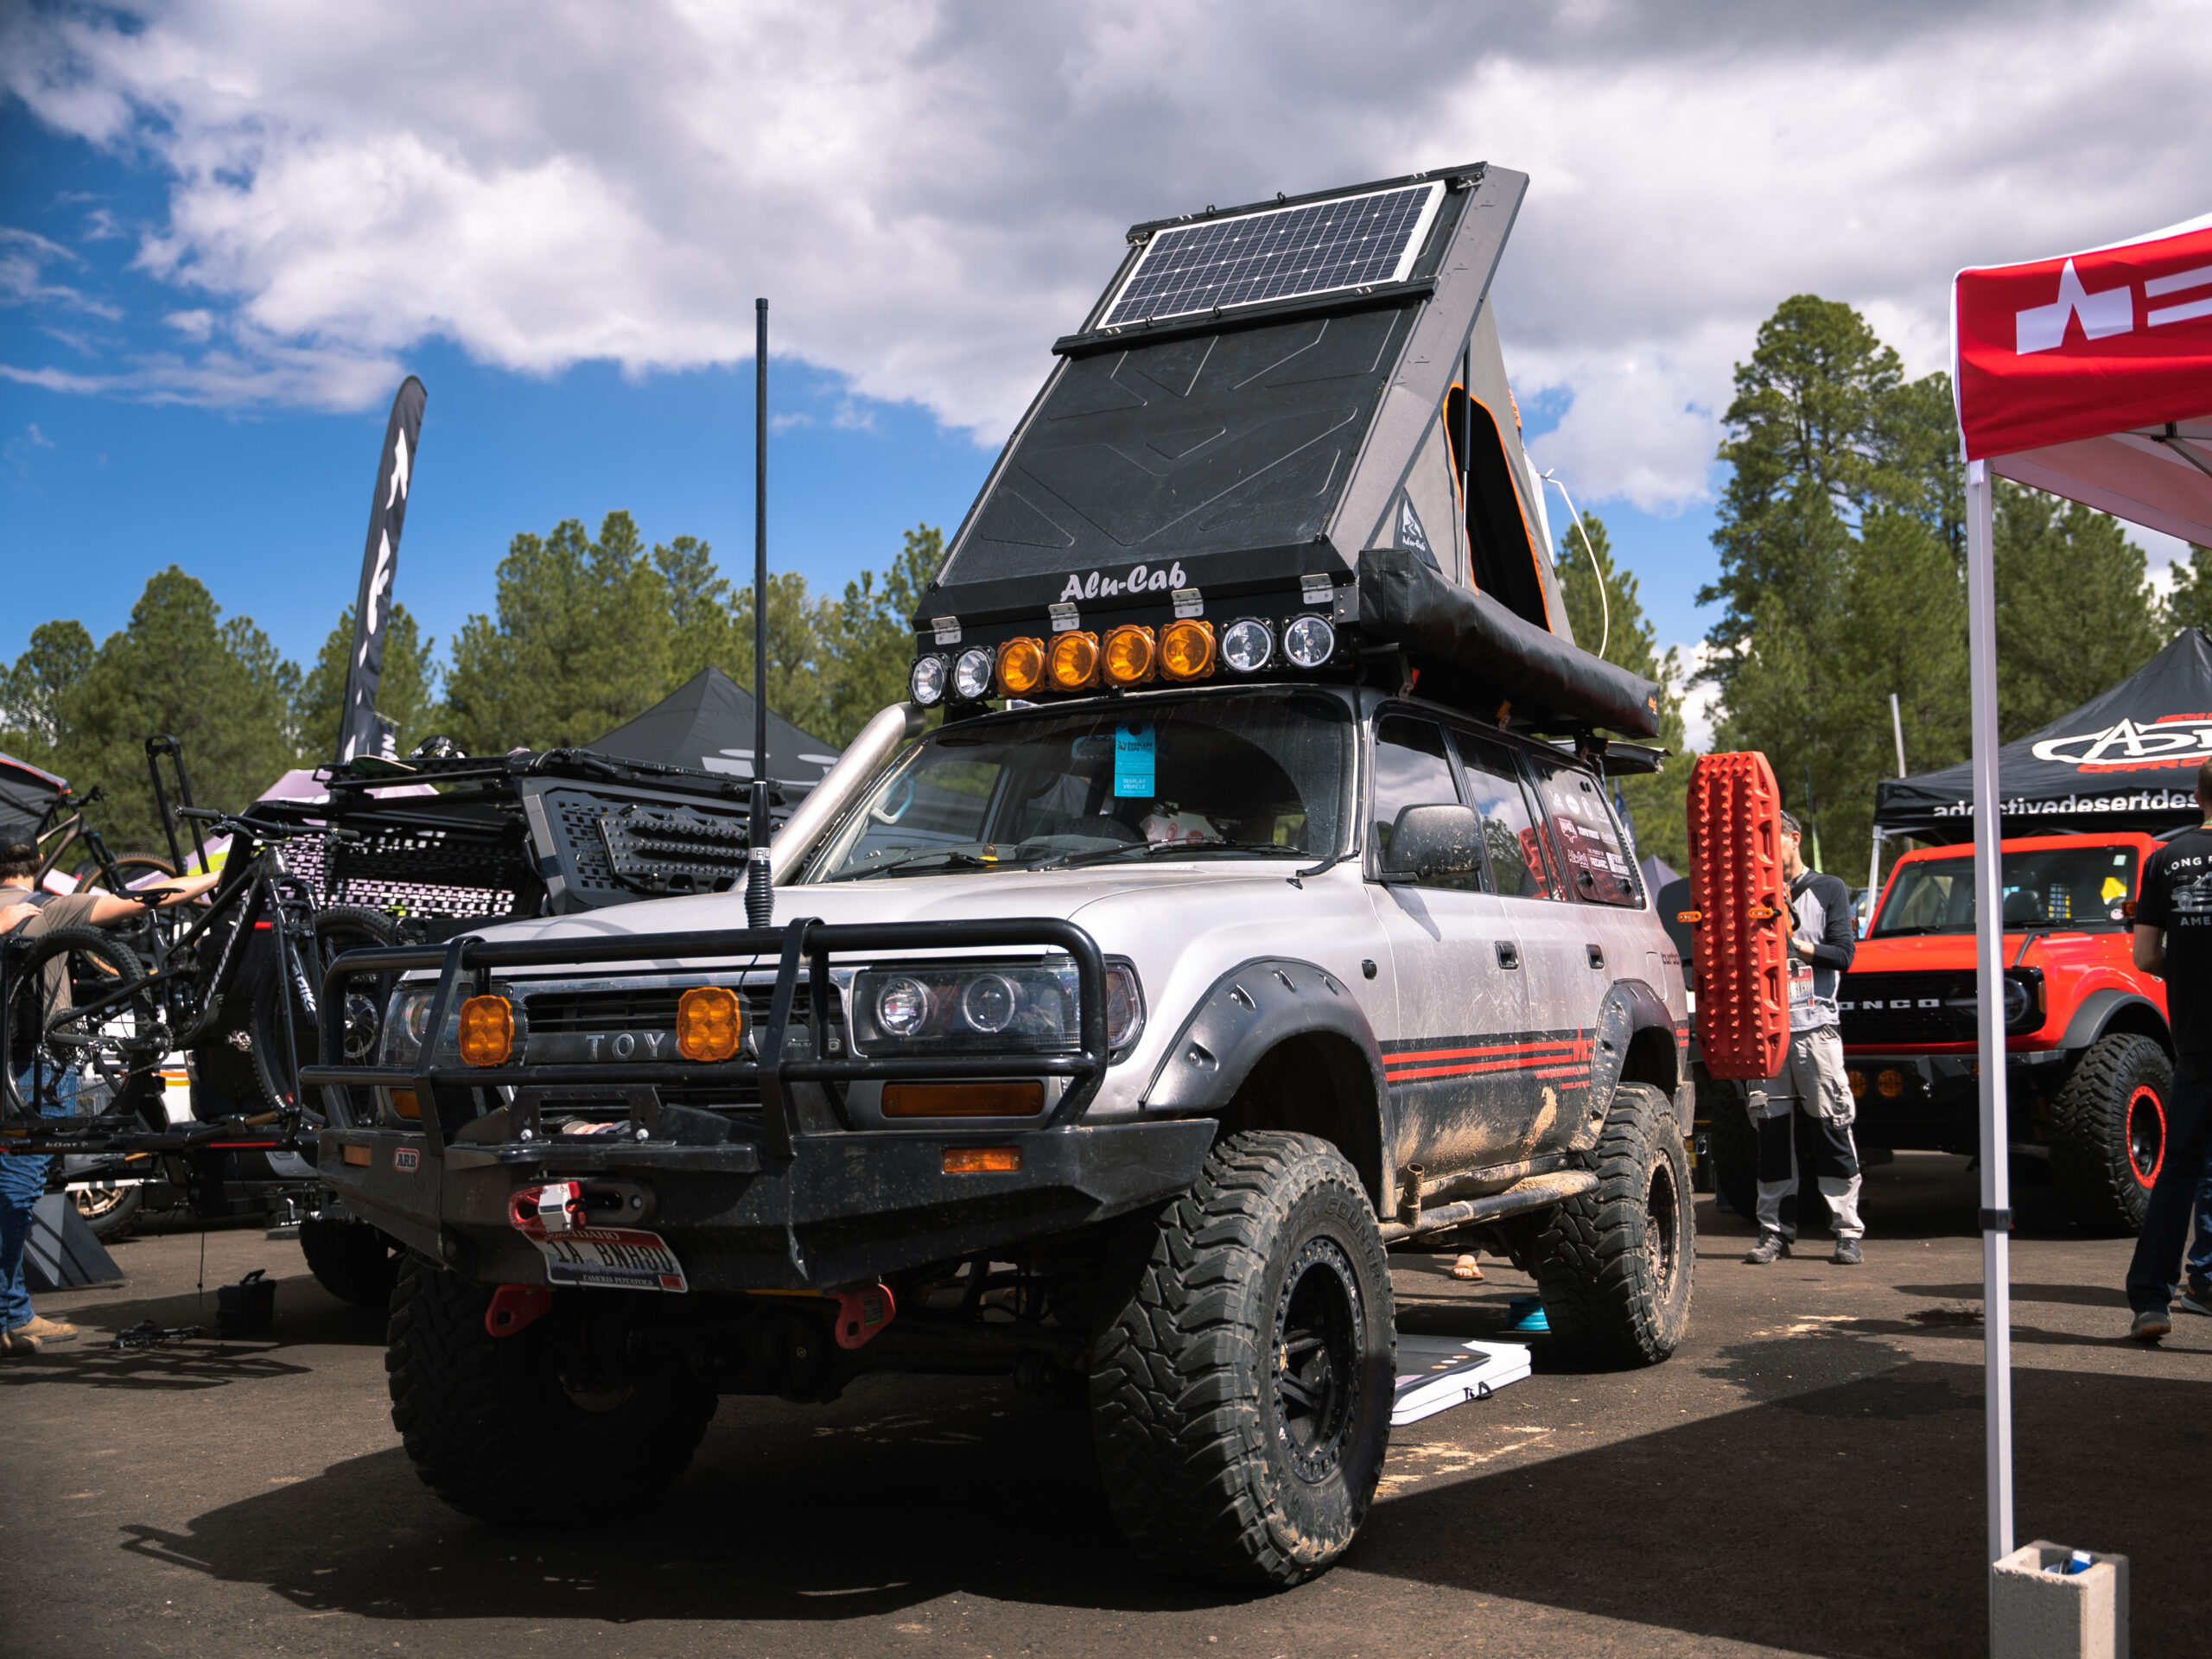 A gray 4Runner with orange details and light bars with Alu-Cab pop top tent.